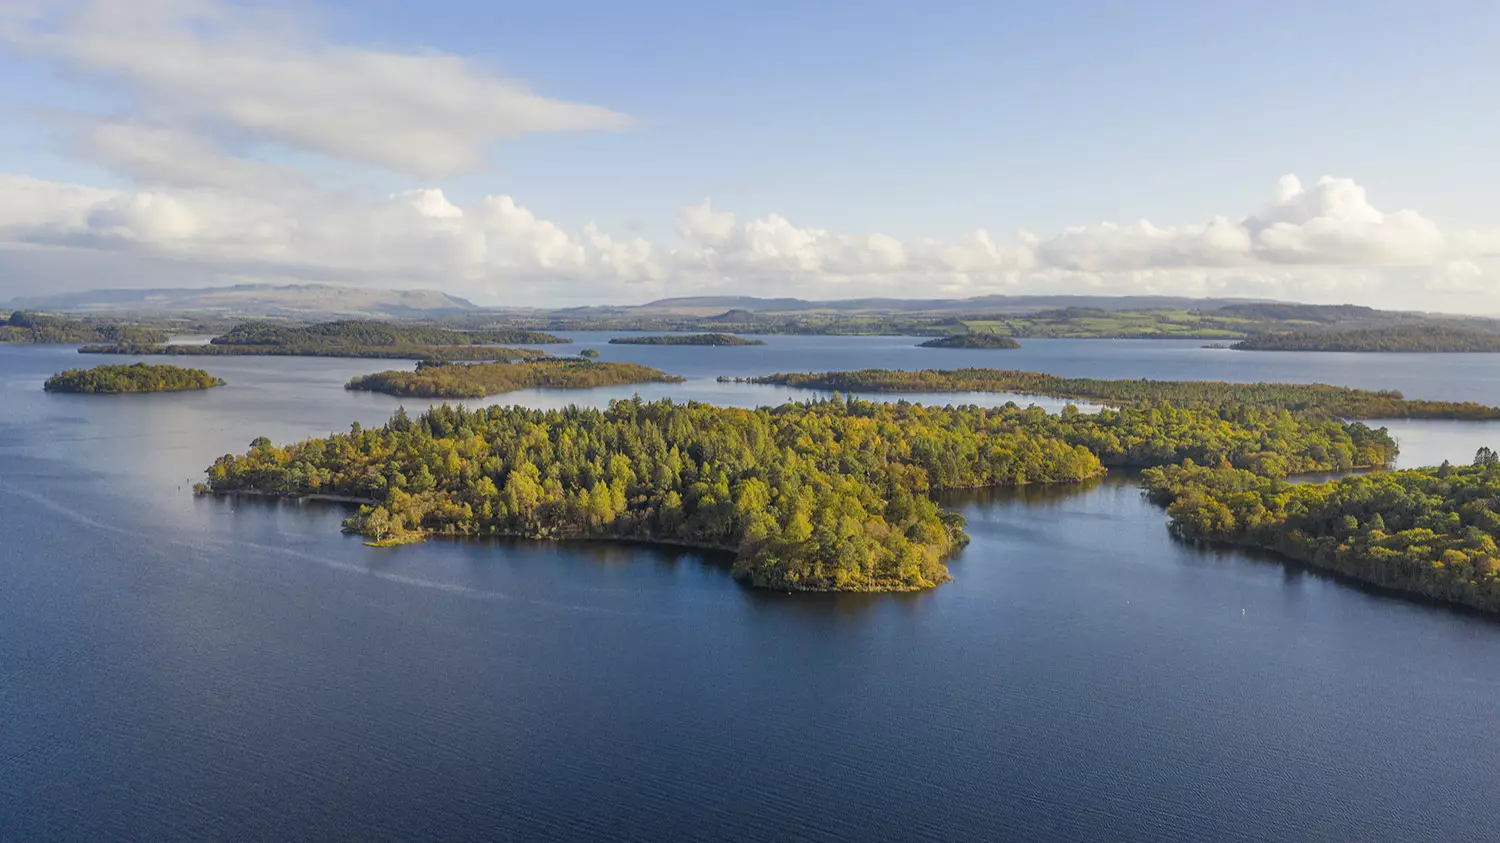 Private Island In Scotland Has Gone On Sale For Same Price As London Flat